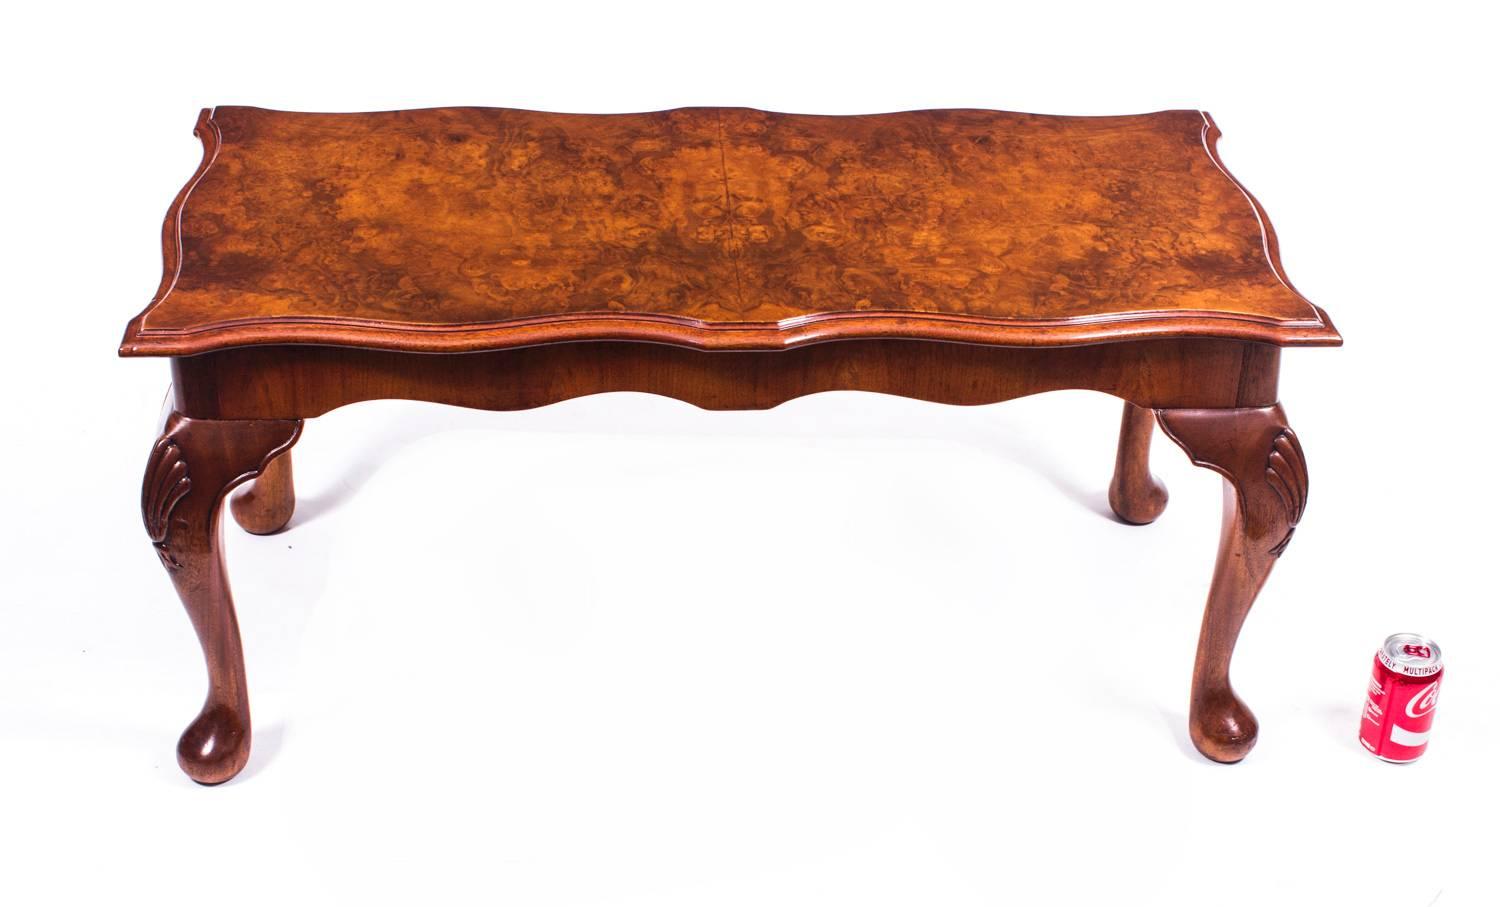 This is a stunningly beautiful English burr walnut coffee table, with a beautiful shaped top and dating from the mid-20th century.

It stands on four elegant solid walnut hand-carved Queen Anne style legs which
set against the rich texture of the